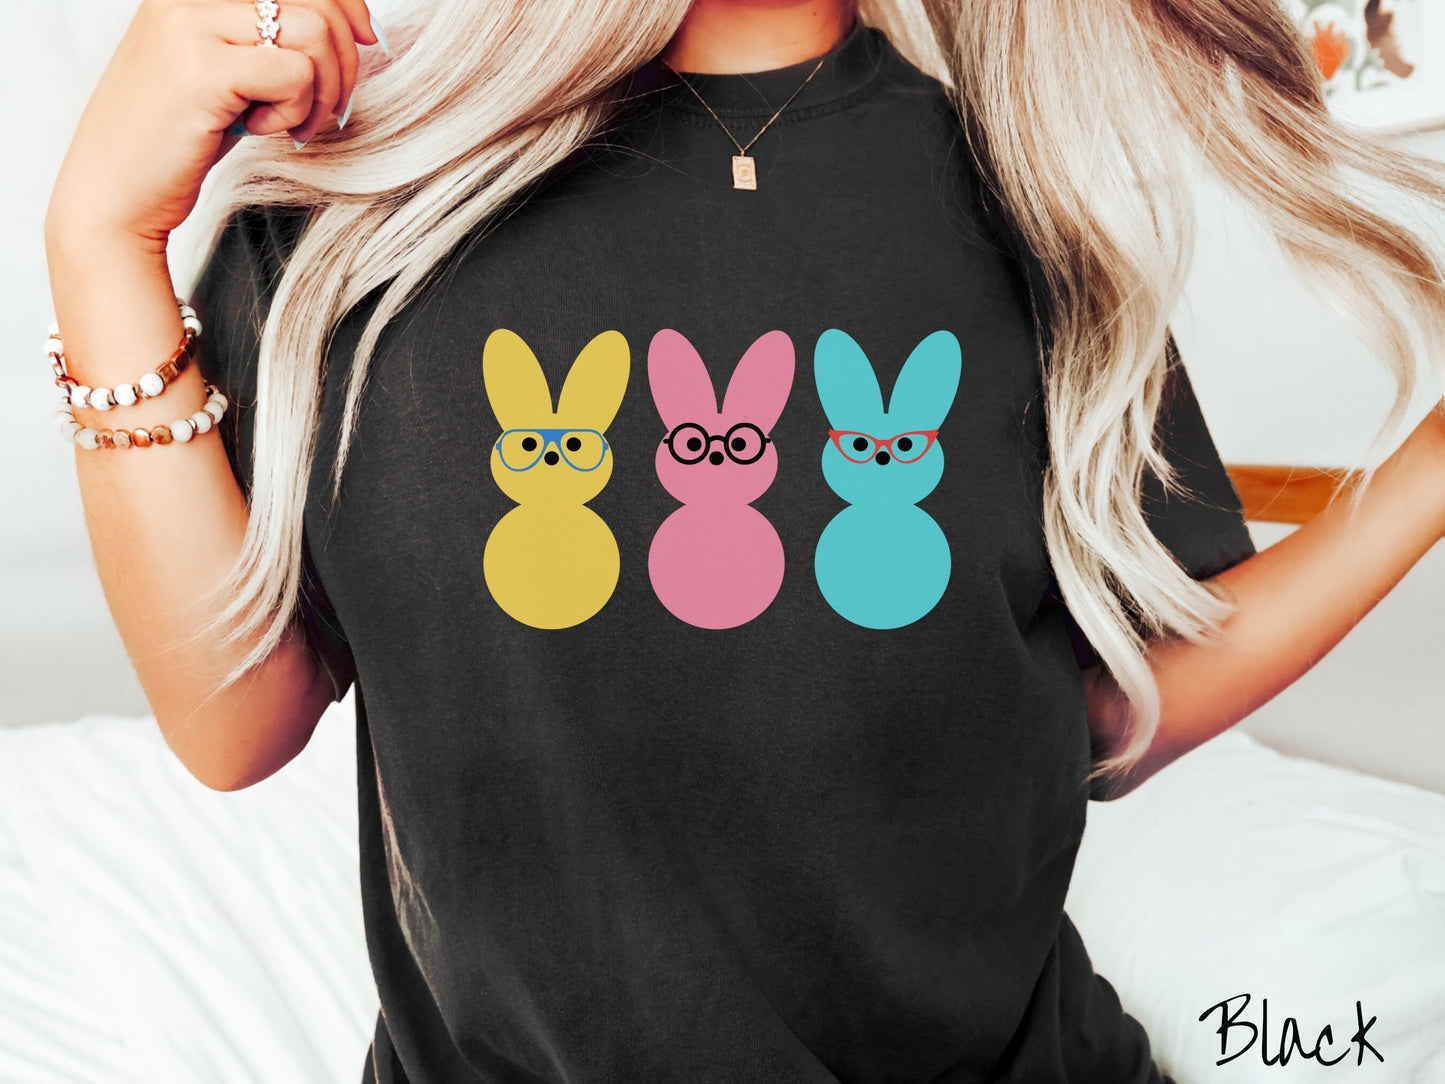 A woman wearing a cute, vintage black colored shirt with three peep-like rabbits on the front. One is yellow and wearing blue glasses, the middle is pink with black glasses, and the one on the right is light blue with red glasses.